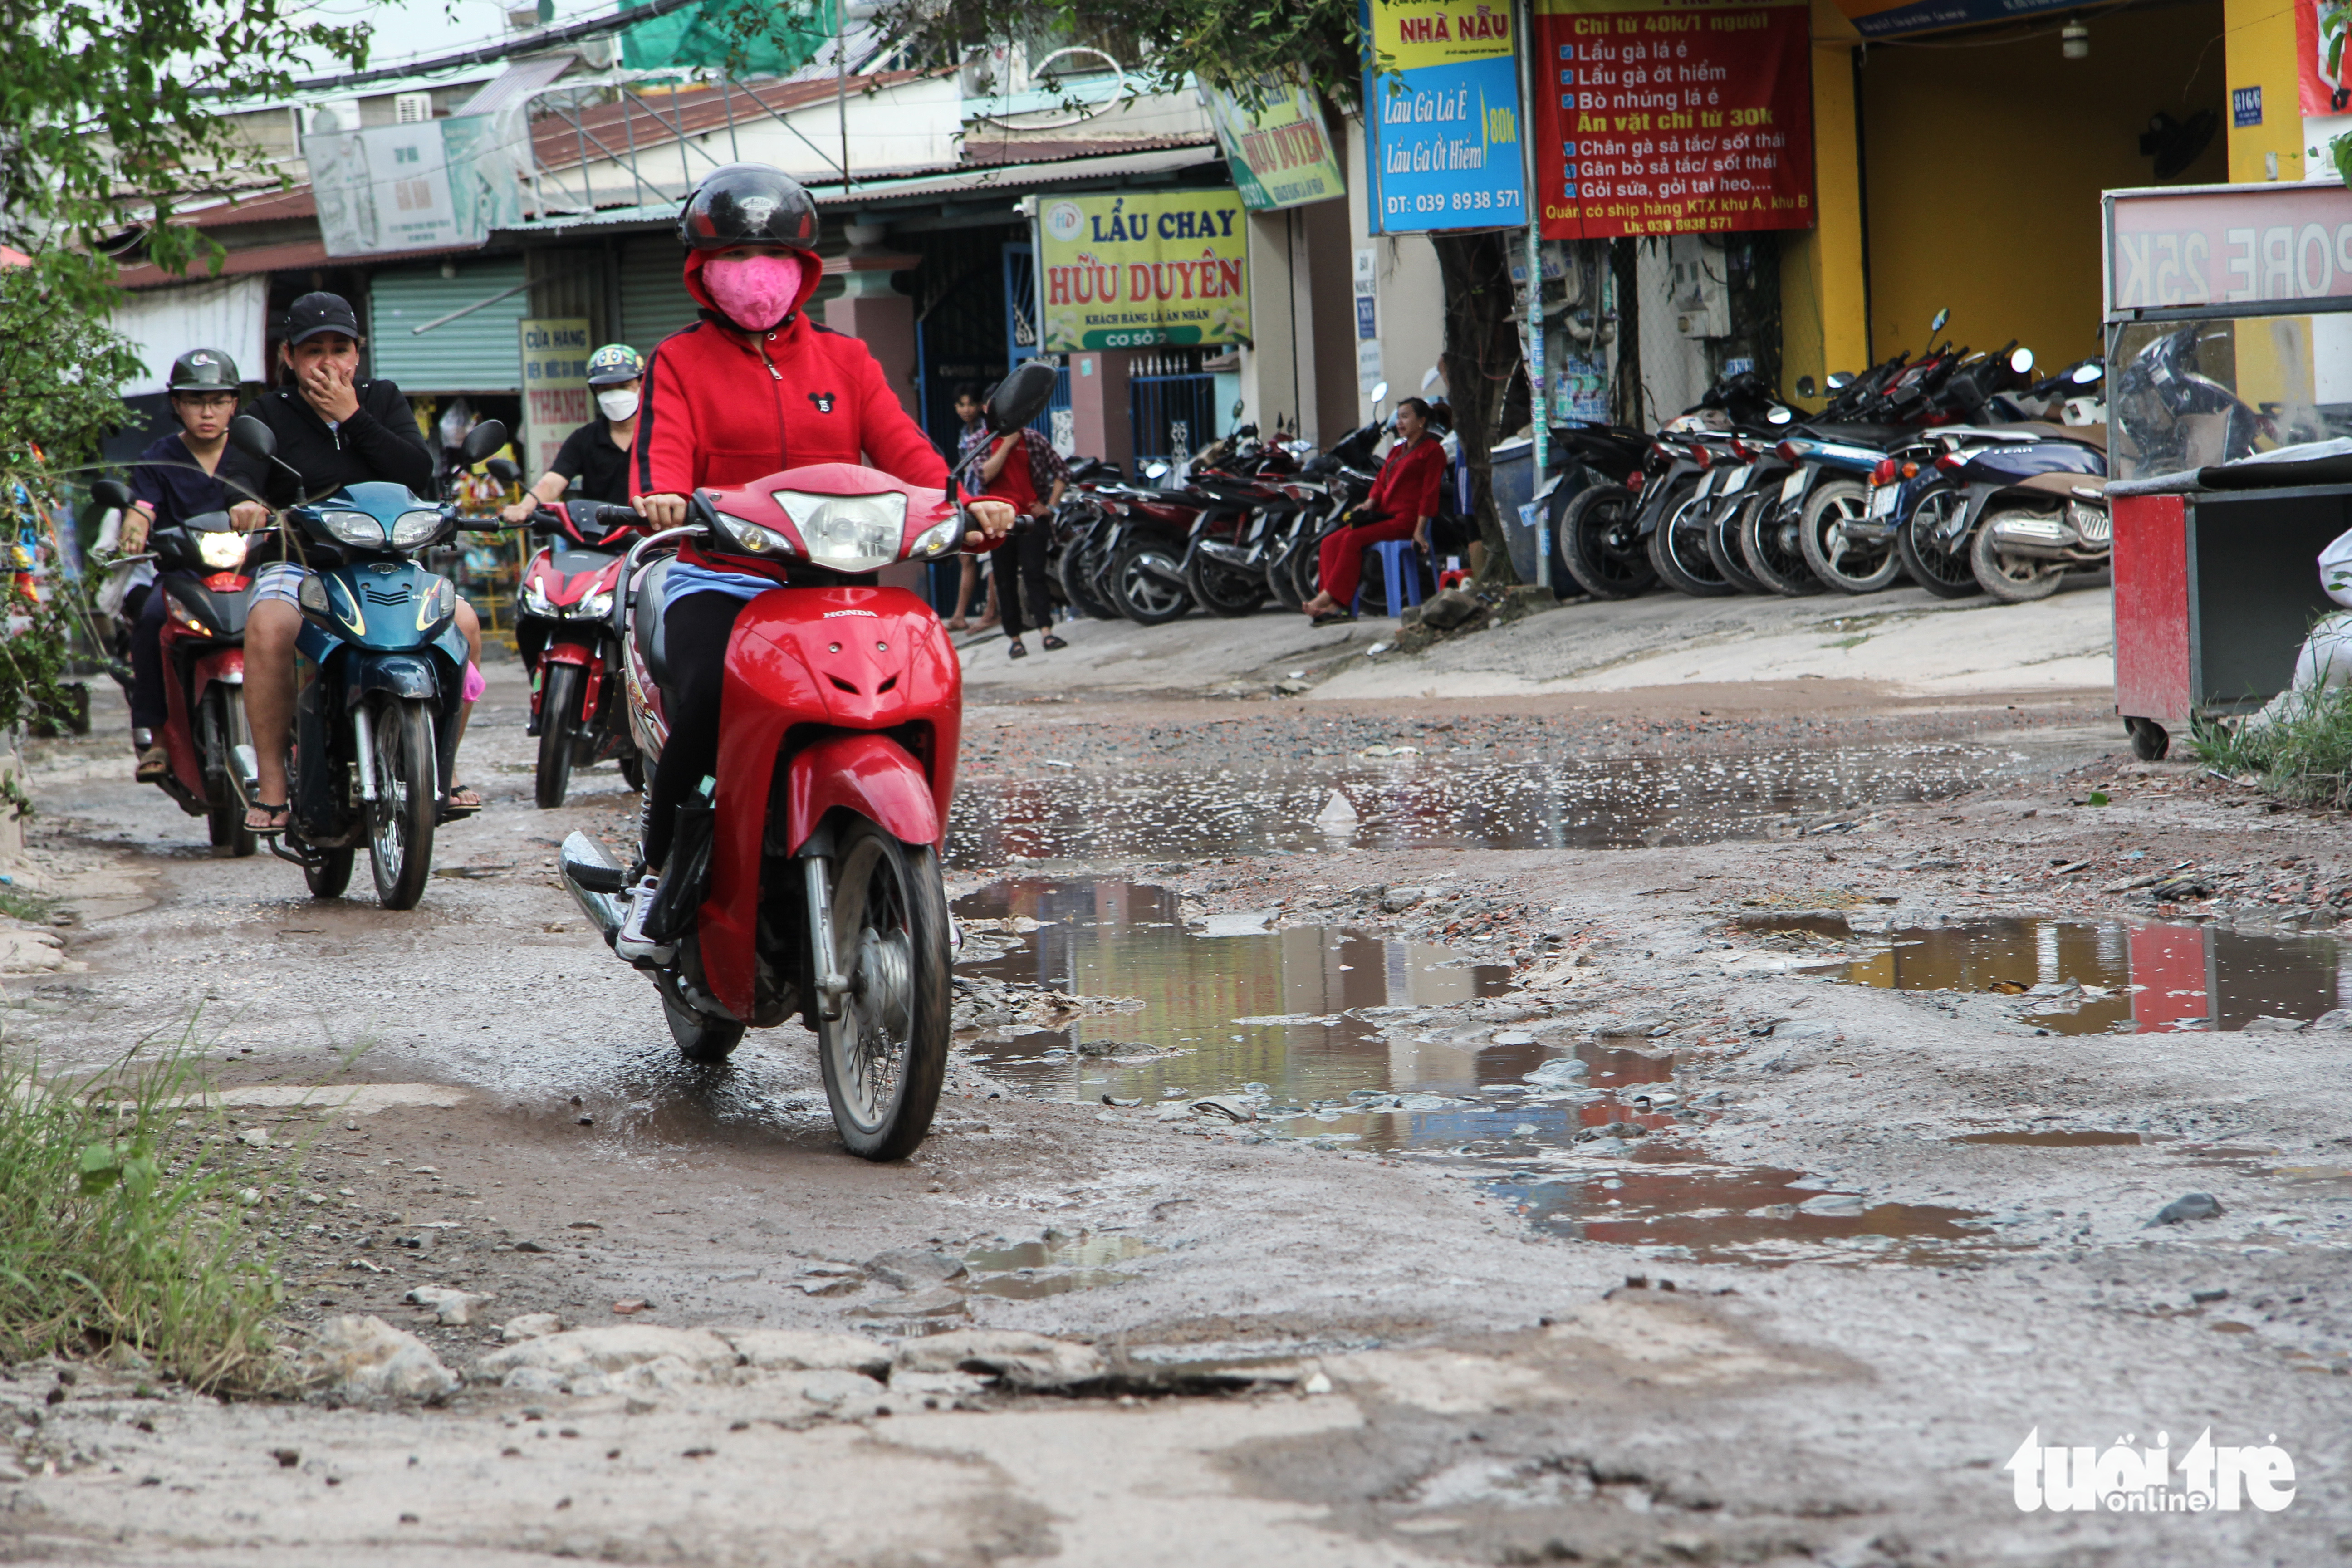 Motorcyclists travel on the degraded To Vinh Dien Street in the complex of universities under the Vietnam National University-Ho Chi Minh City in Binh Duong Province, Vietnam. Photo: Kieu Hanh / Tuoi Tre